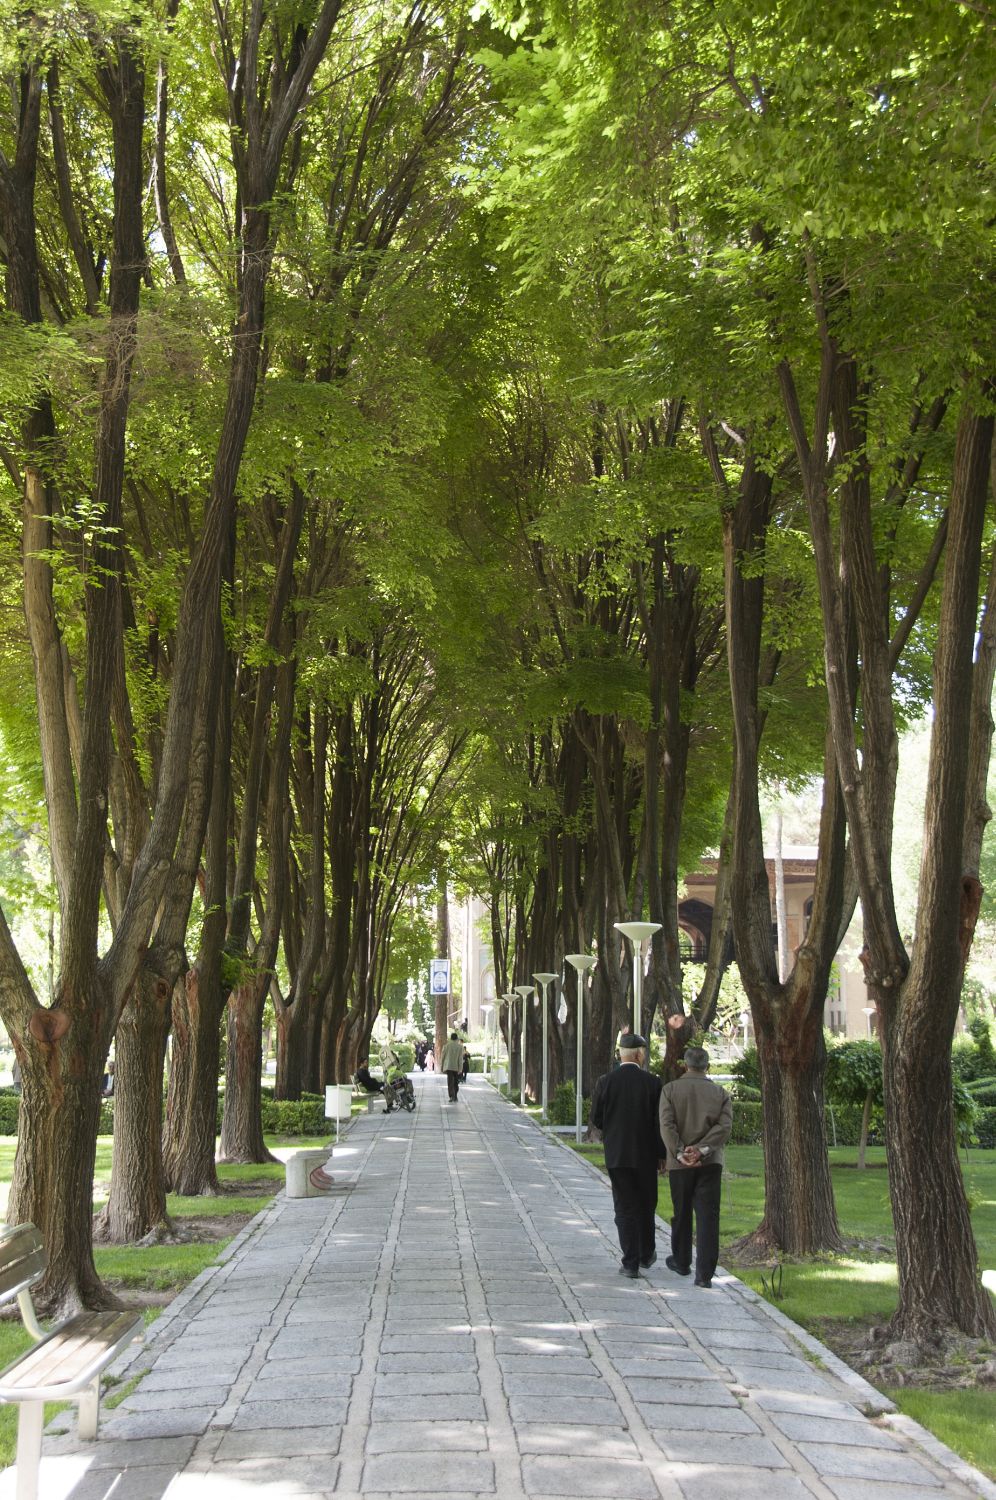 View of tree-lined path in gardens.